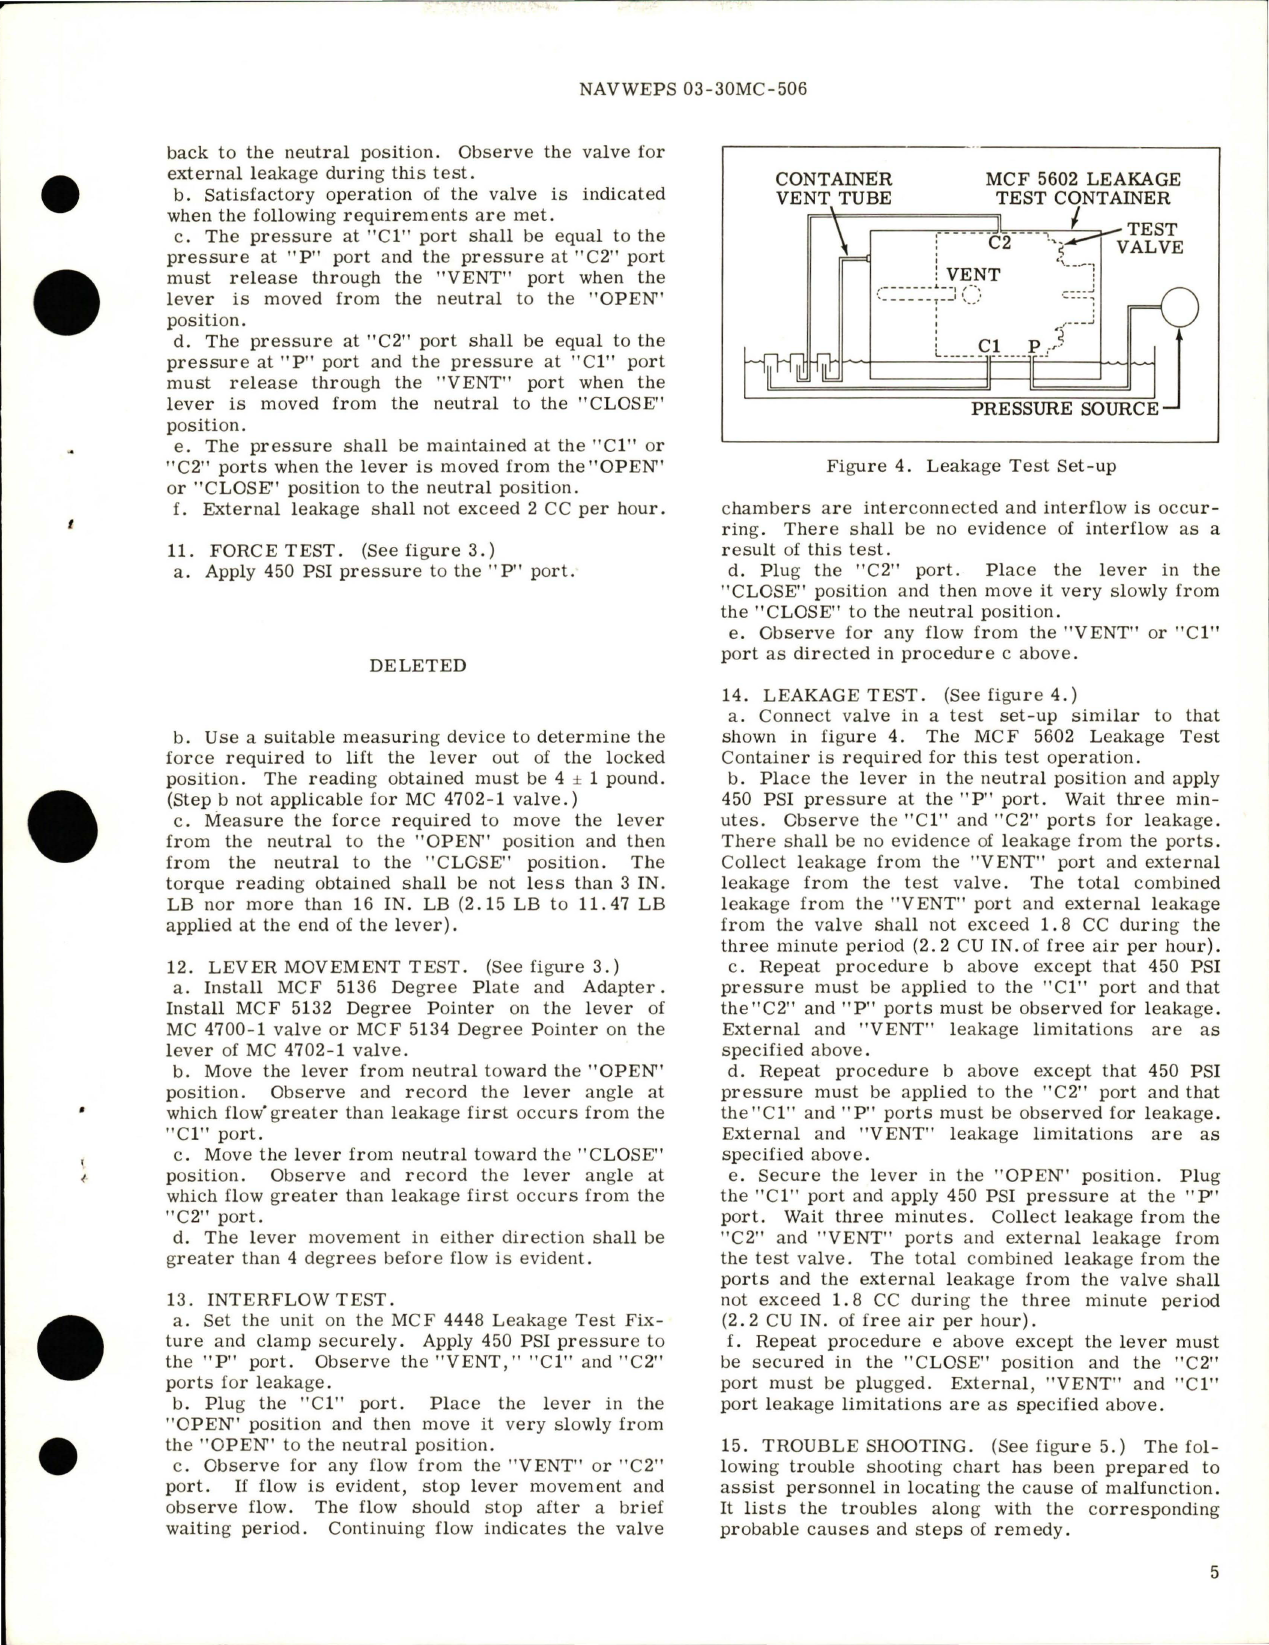 Sample page 5 from AirCorps Library document: Overhaul with Parts Breakdown for Valve Selector Assembly - MC 4700-1 and MC 4702-1